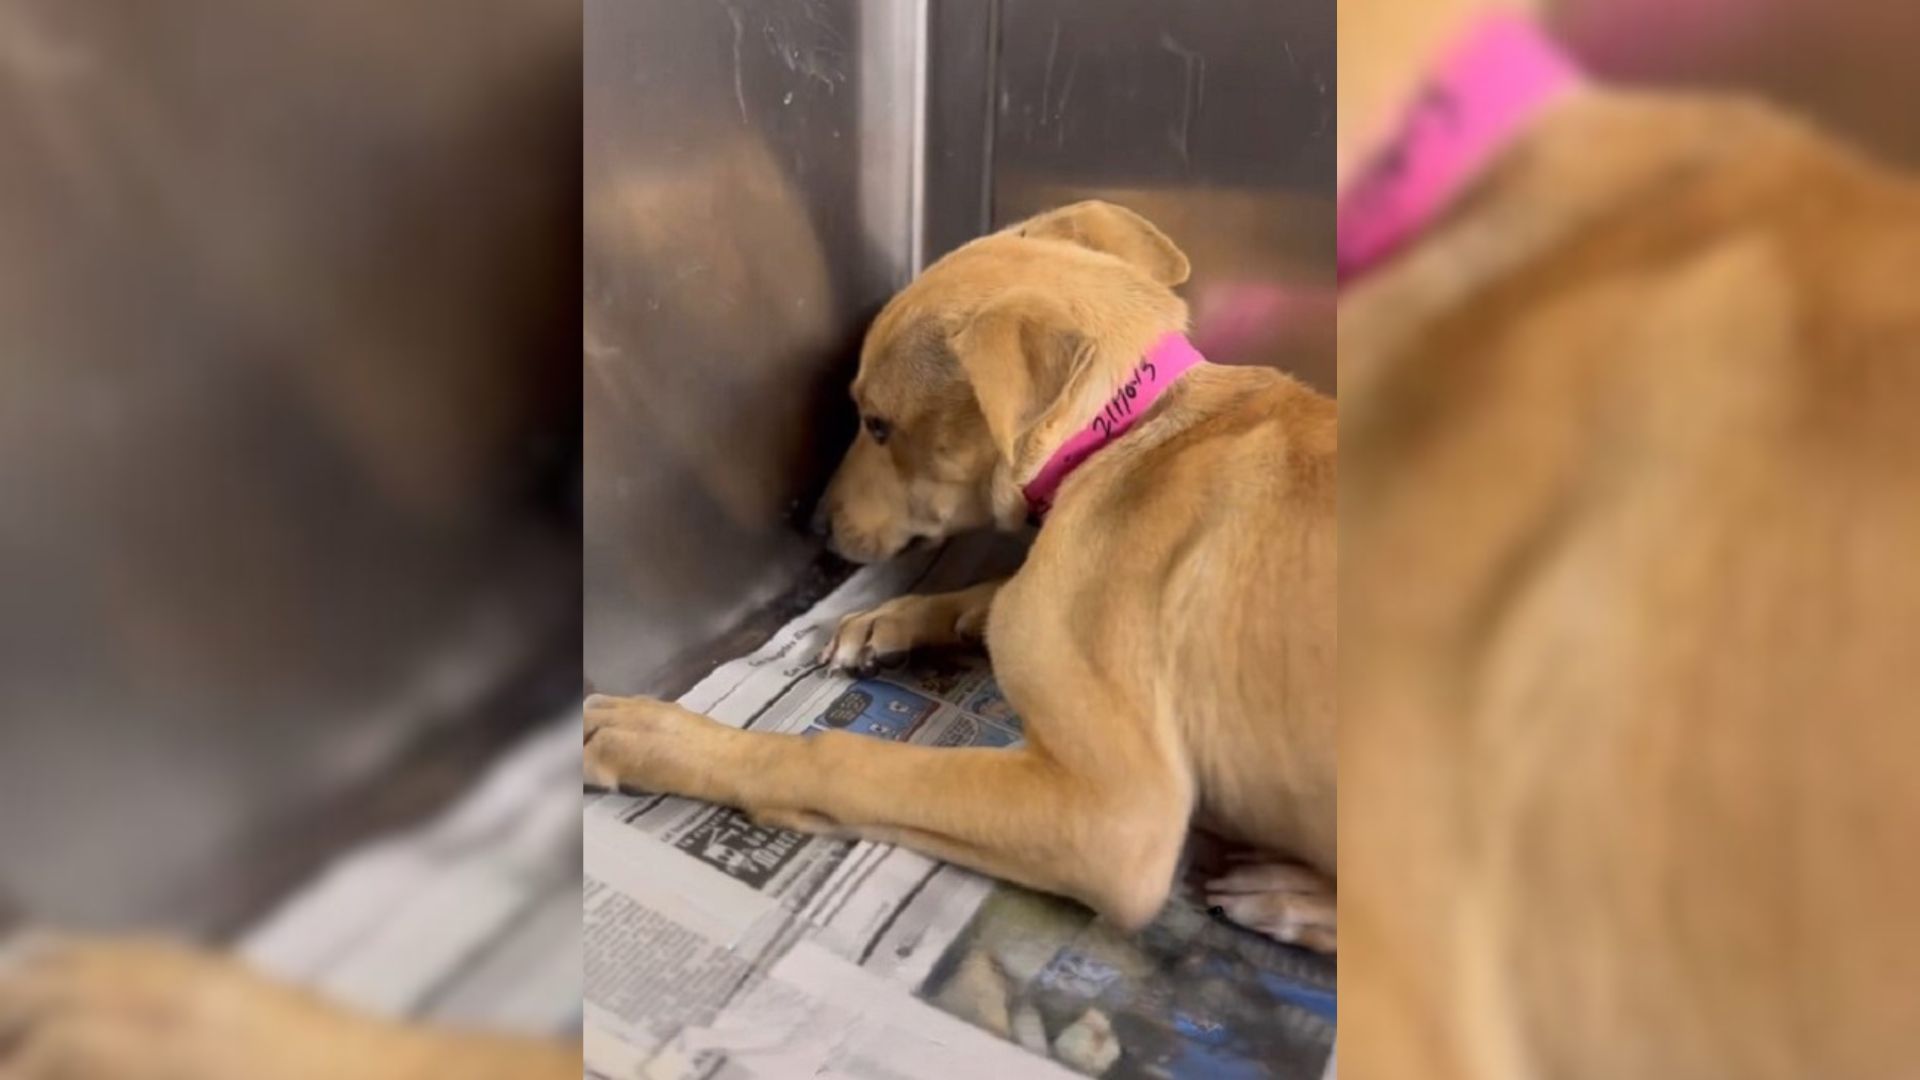 Rescuers Saved A Frightened Dog Who Wouldn’t Stop Shaking Even After Being Taken To The Shelter